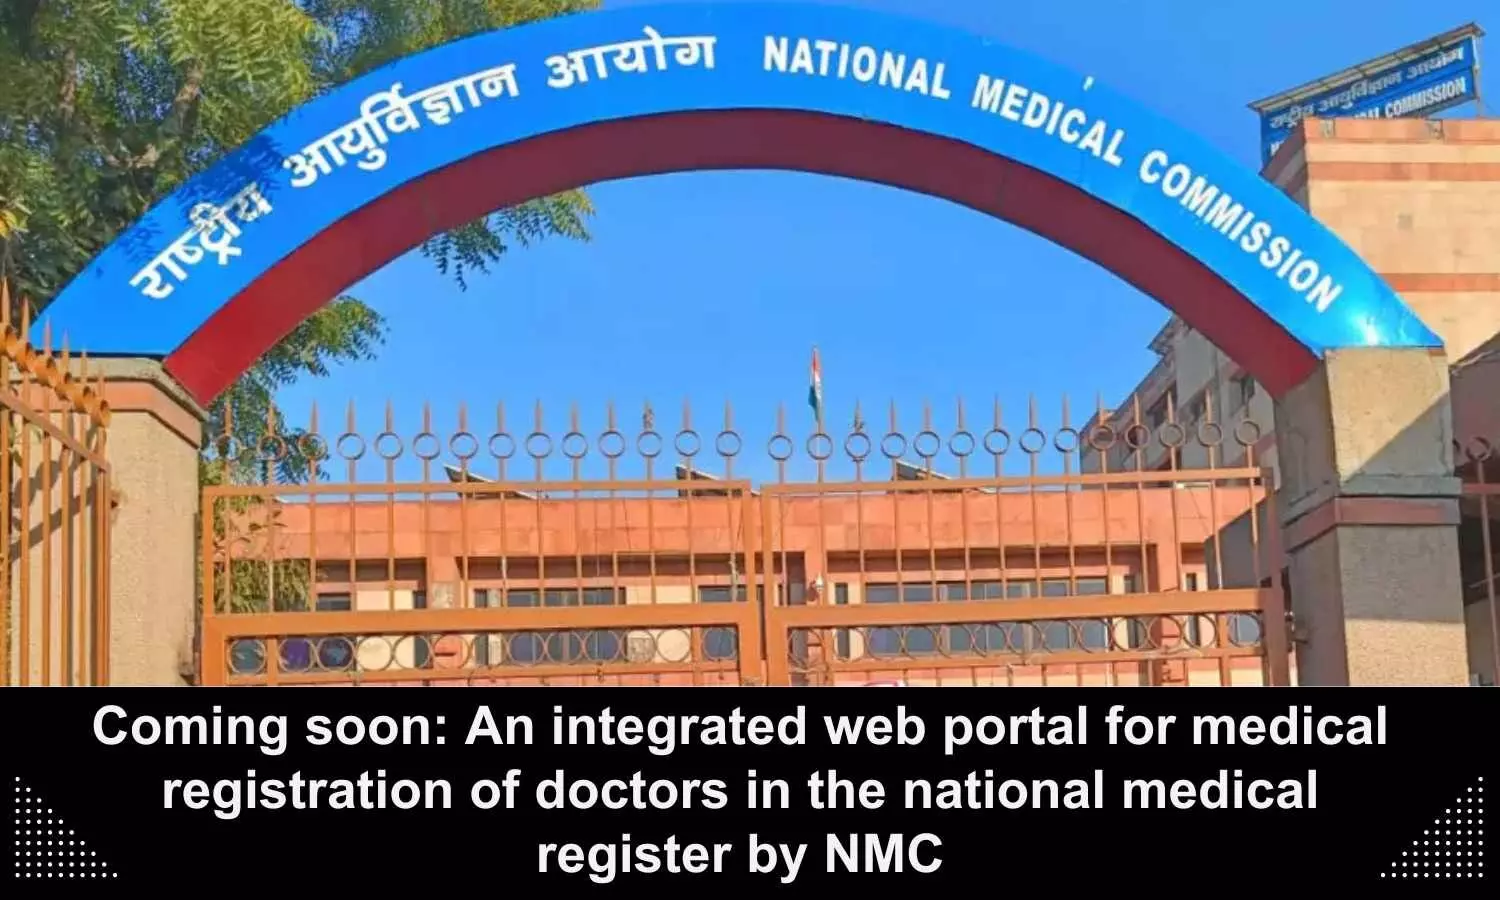 Coming soon: Integrated web portal for medical registration of doctors in national medical register by NMC